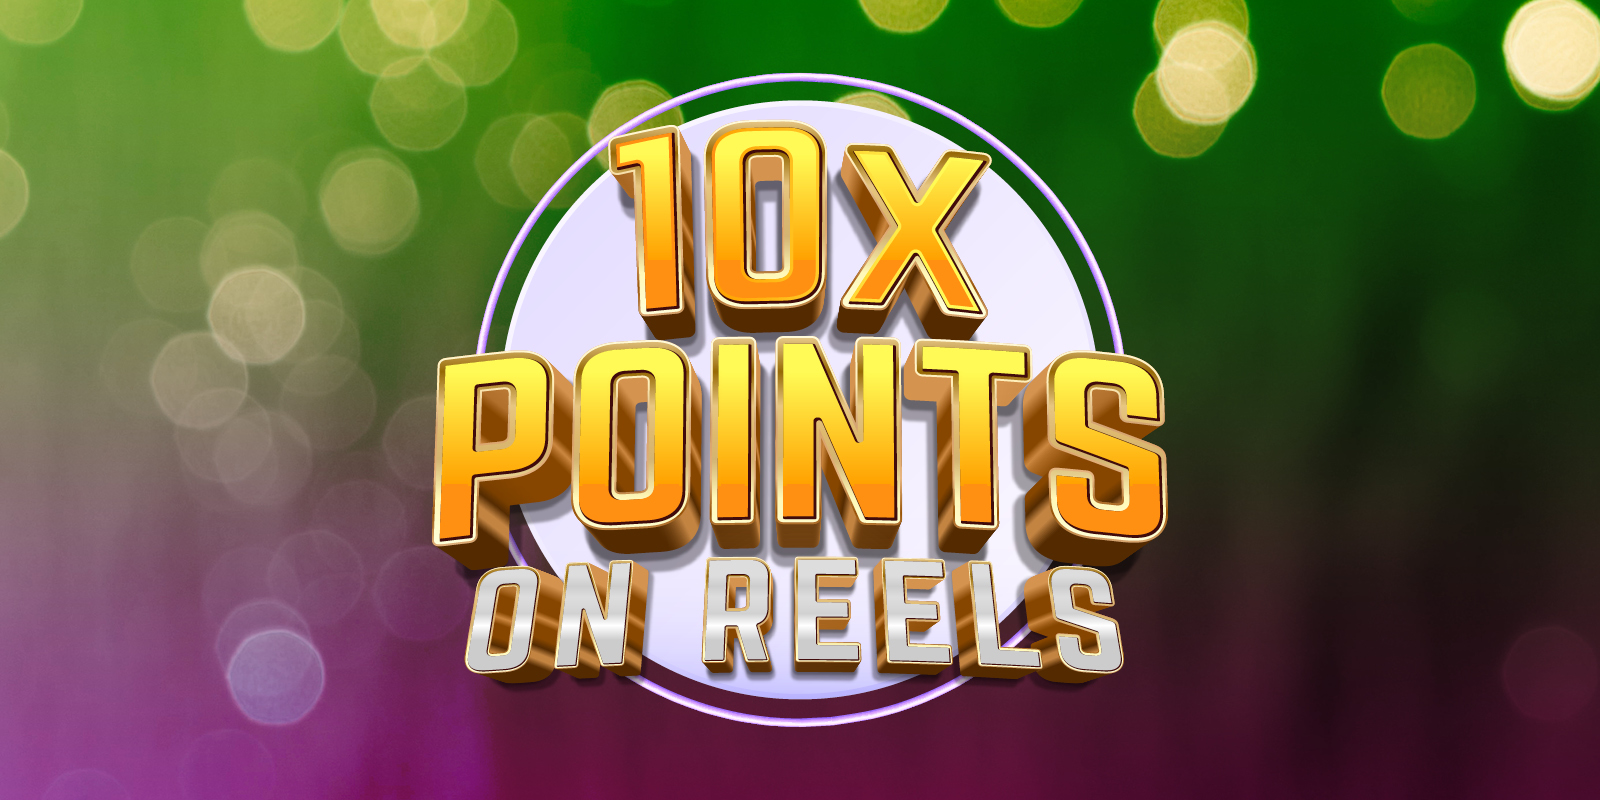 10X Points on Reels creative showing green and purple supportive colors behind the gold letters